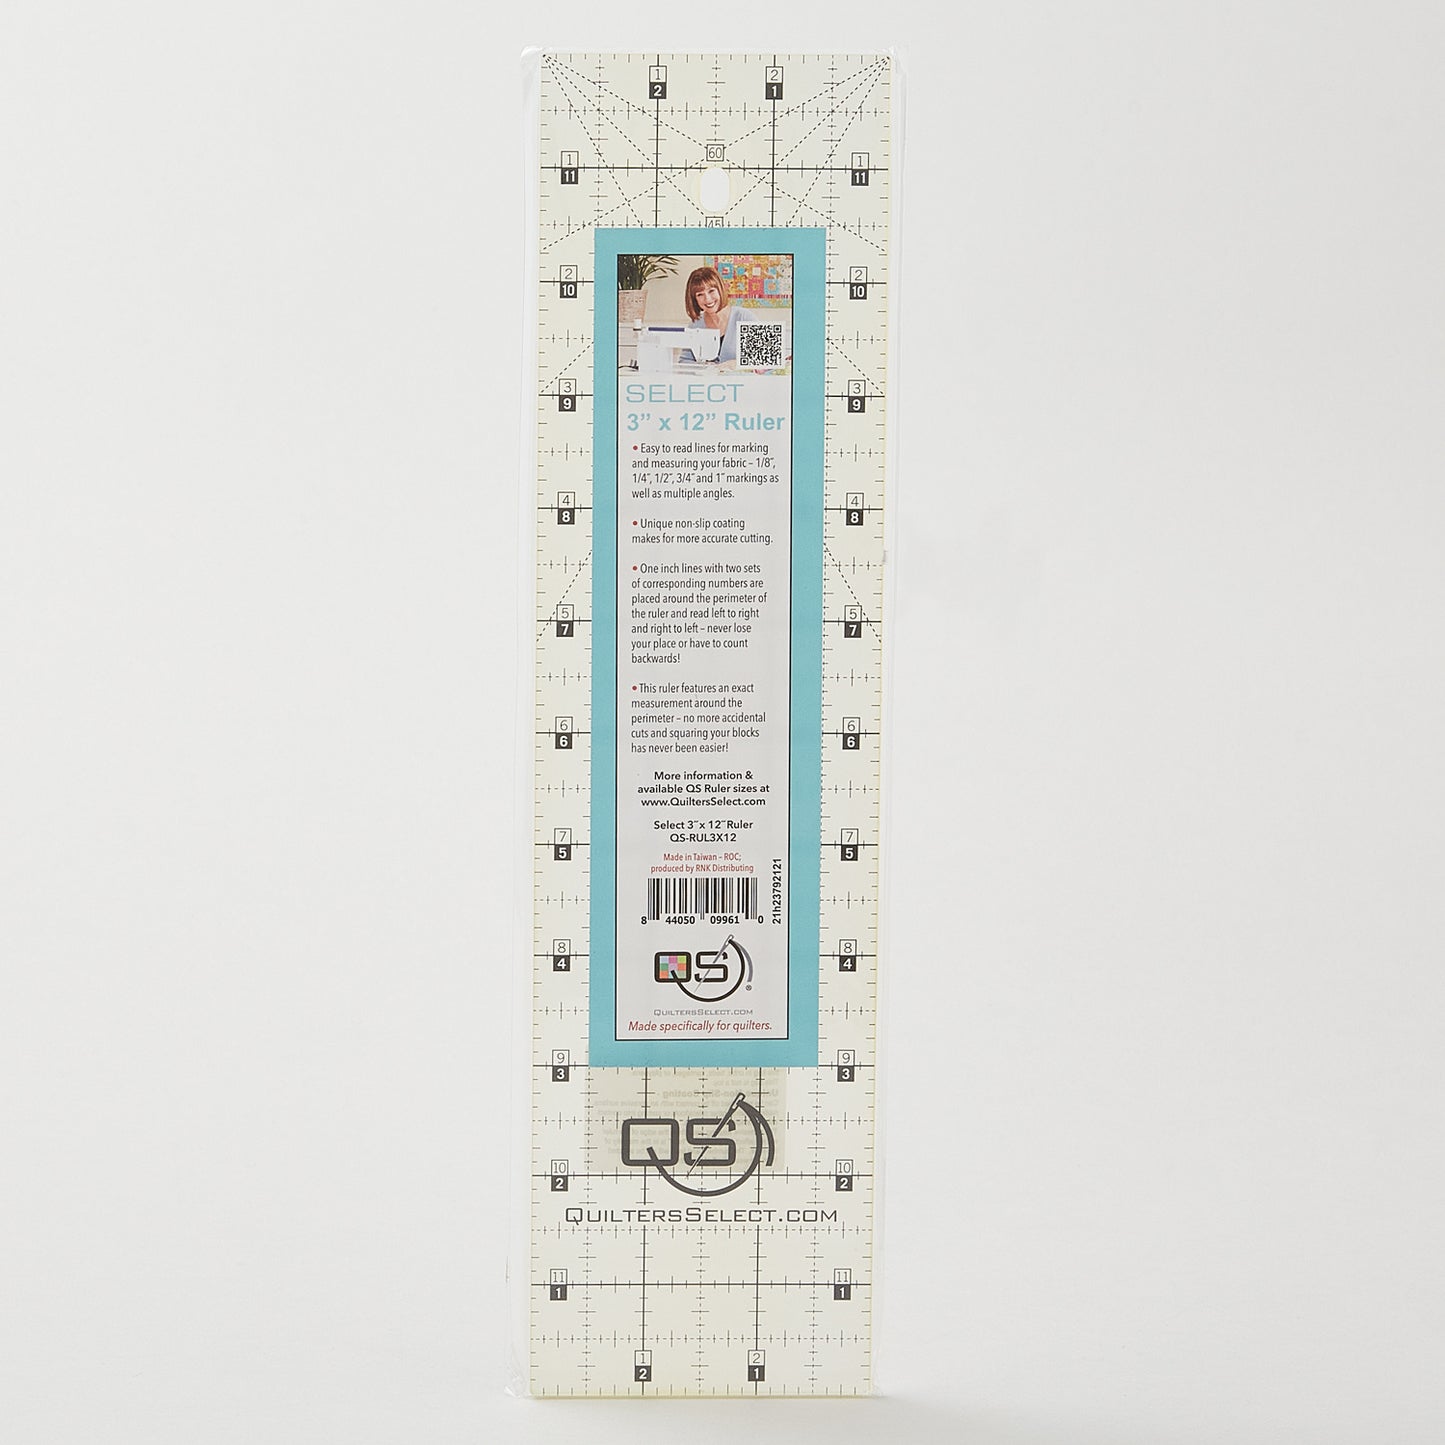 Quilters Select Non-Slip Ruler - 3" x 12" Alternative View #1